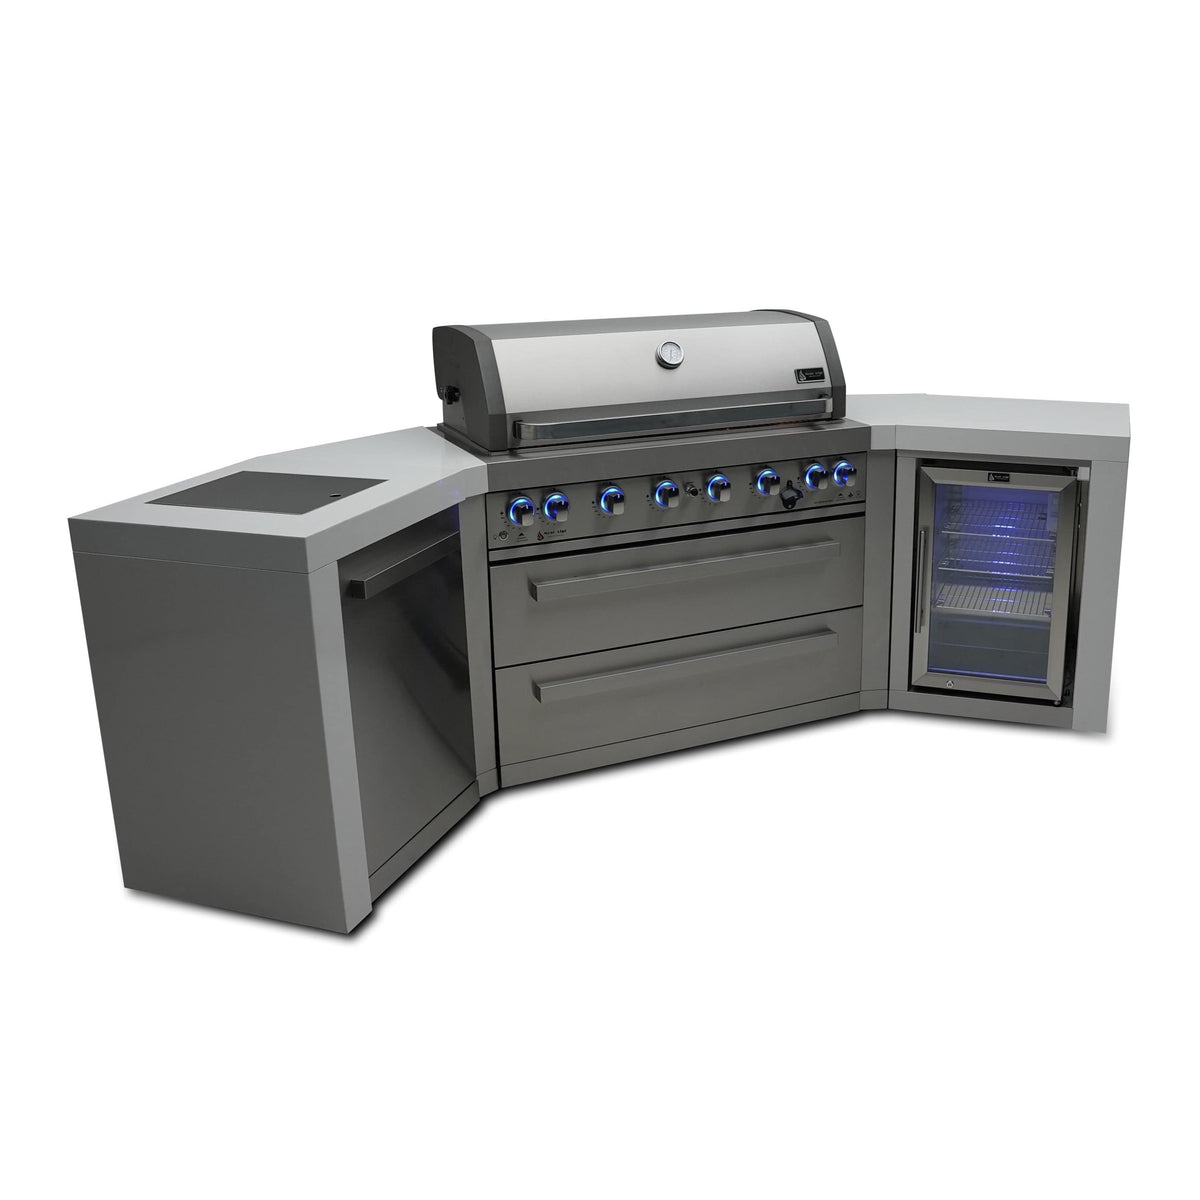 Mont Alpi Islands Mont Alpi 805 Deluxe Island with Fridge Cabinet and Two 45 Degree Corners / 6-Burner Grill, 2 Infrared Burners, Fridge, Stainless Steel / MAi805-D45FC